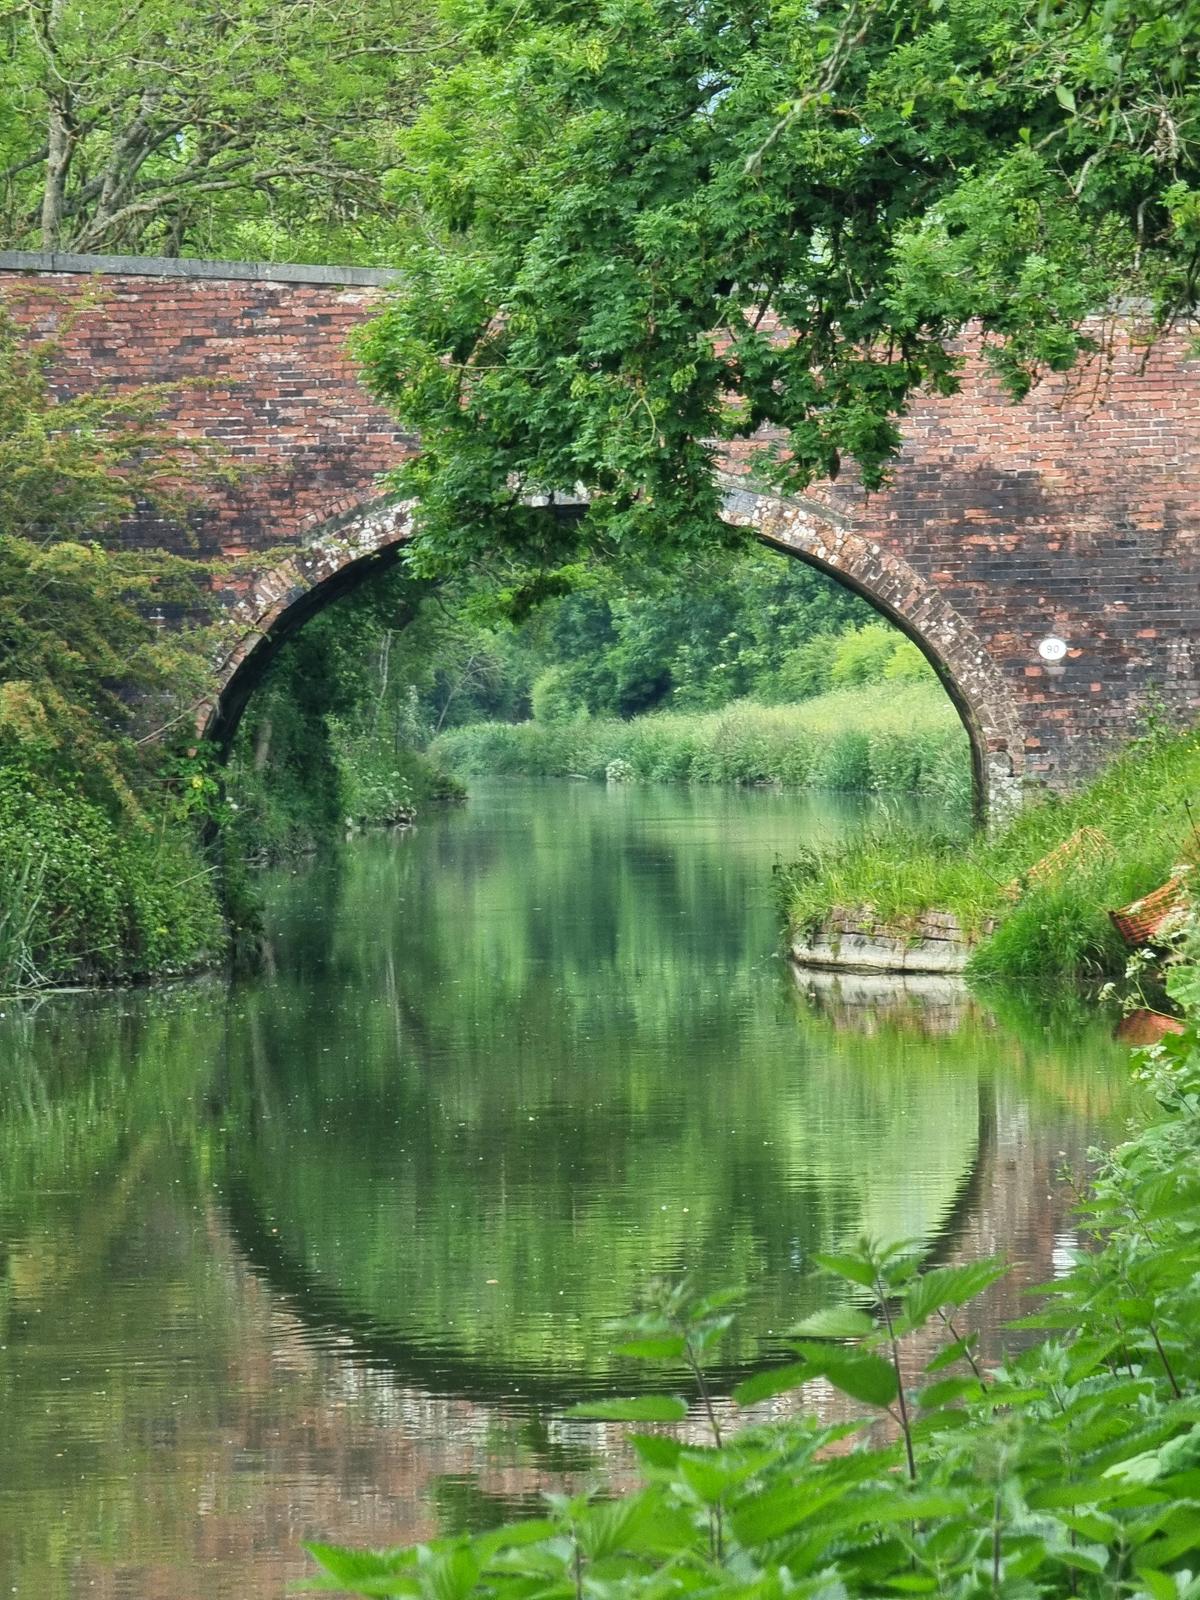 A bridge perfectly reflected in the surface of the canal